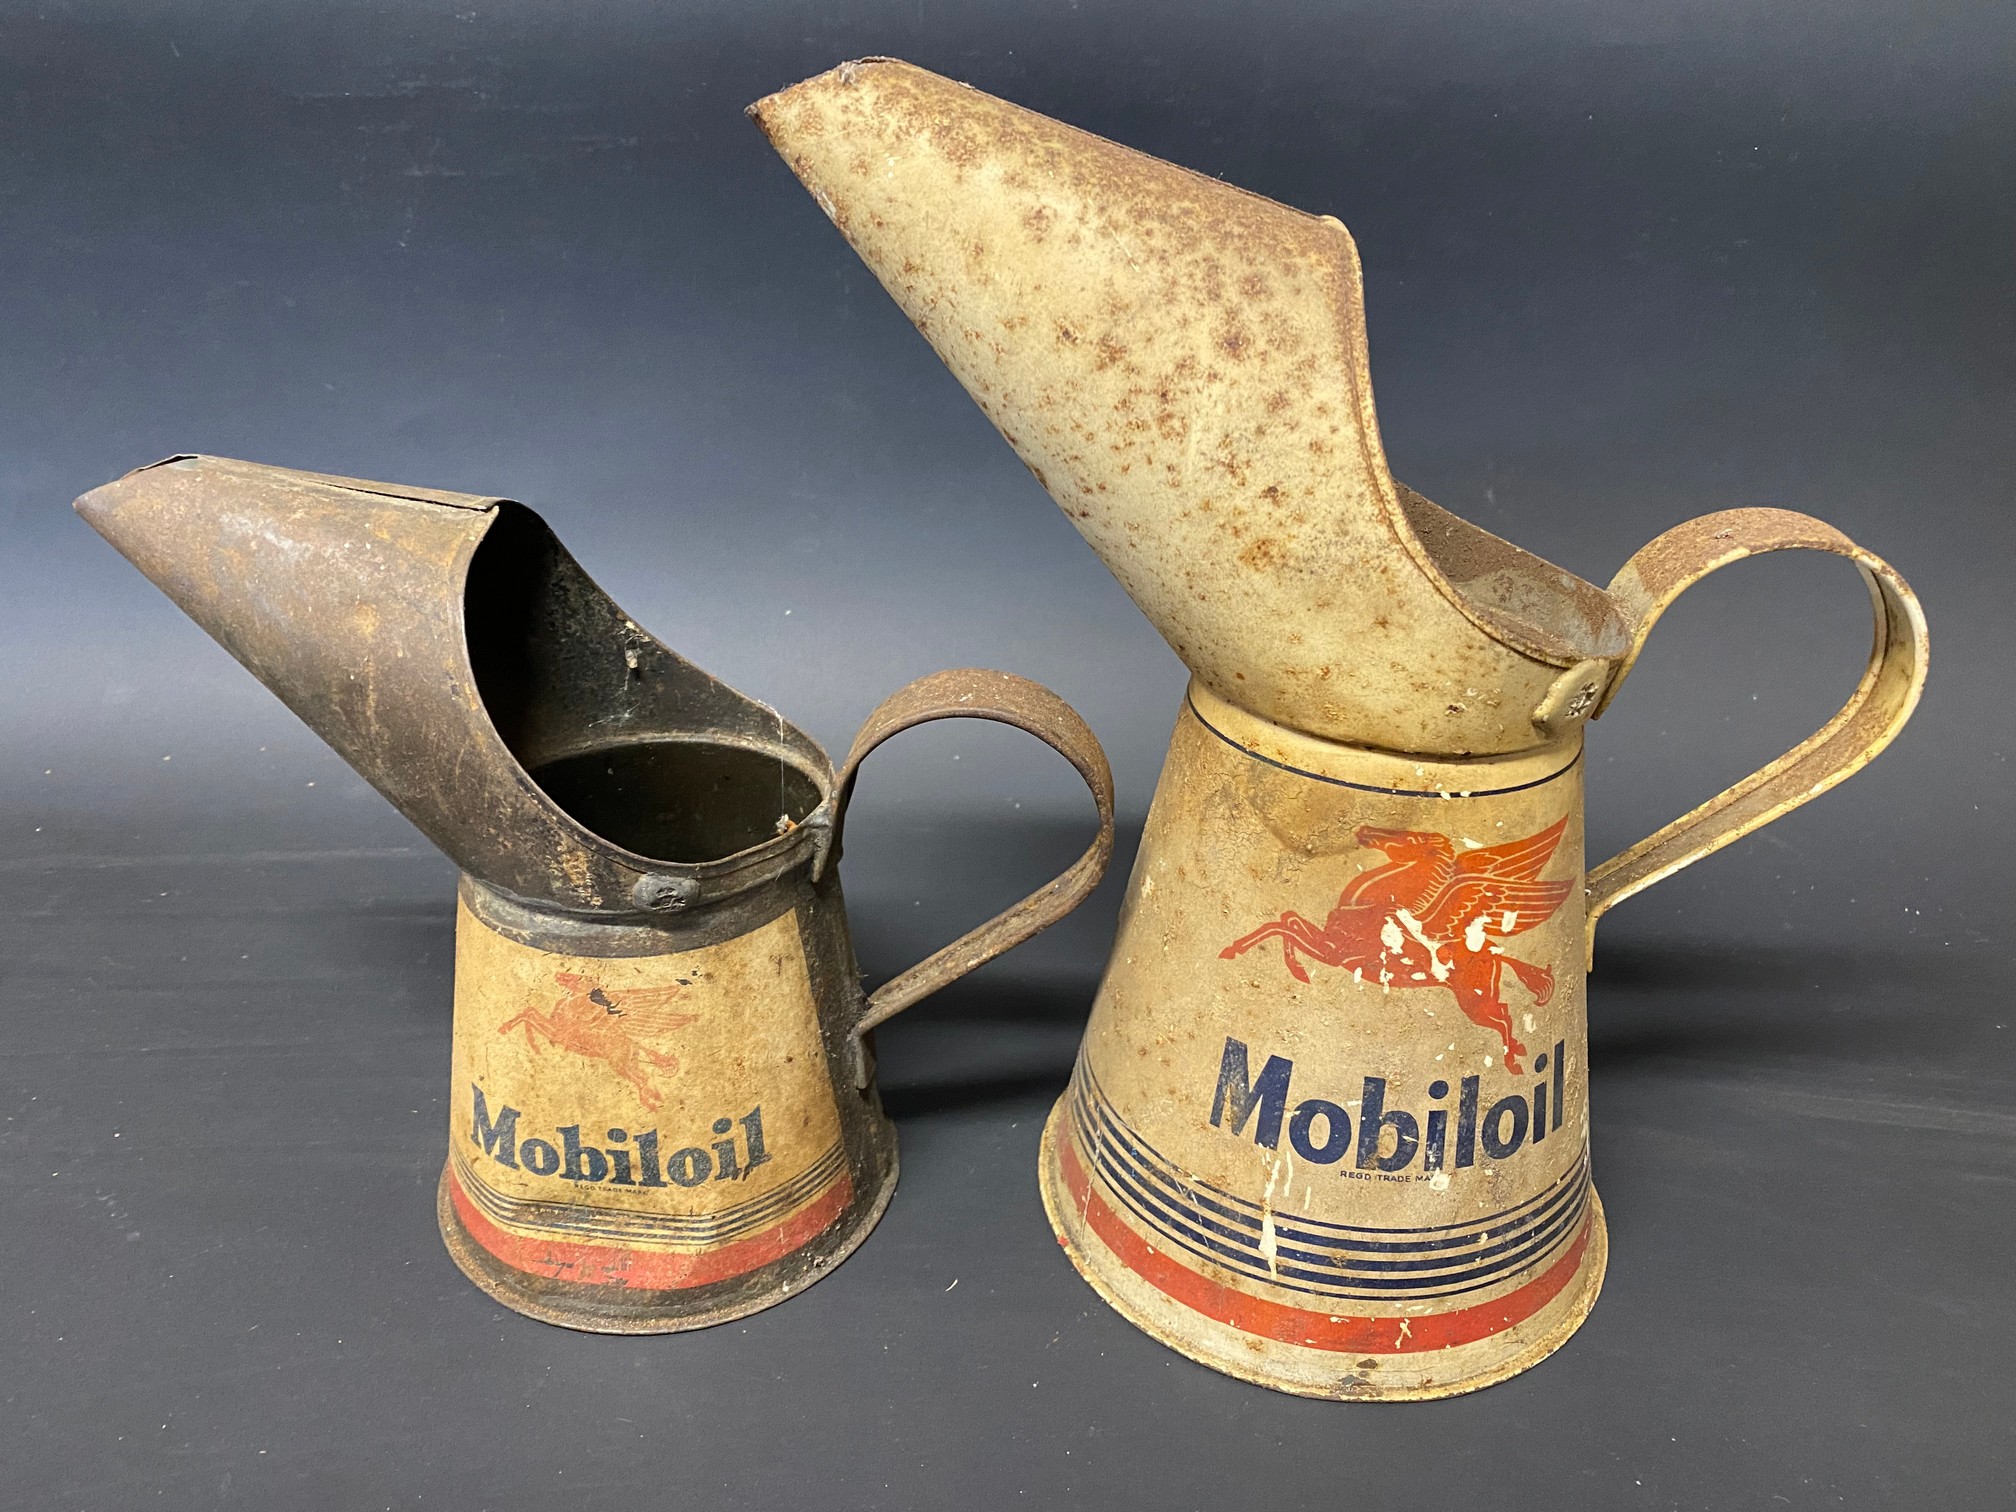 A Mobiloil quart measure and a matching pint measure. - Image 2 of 3